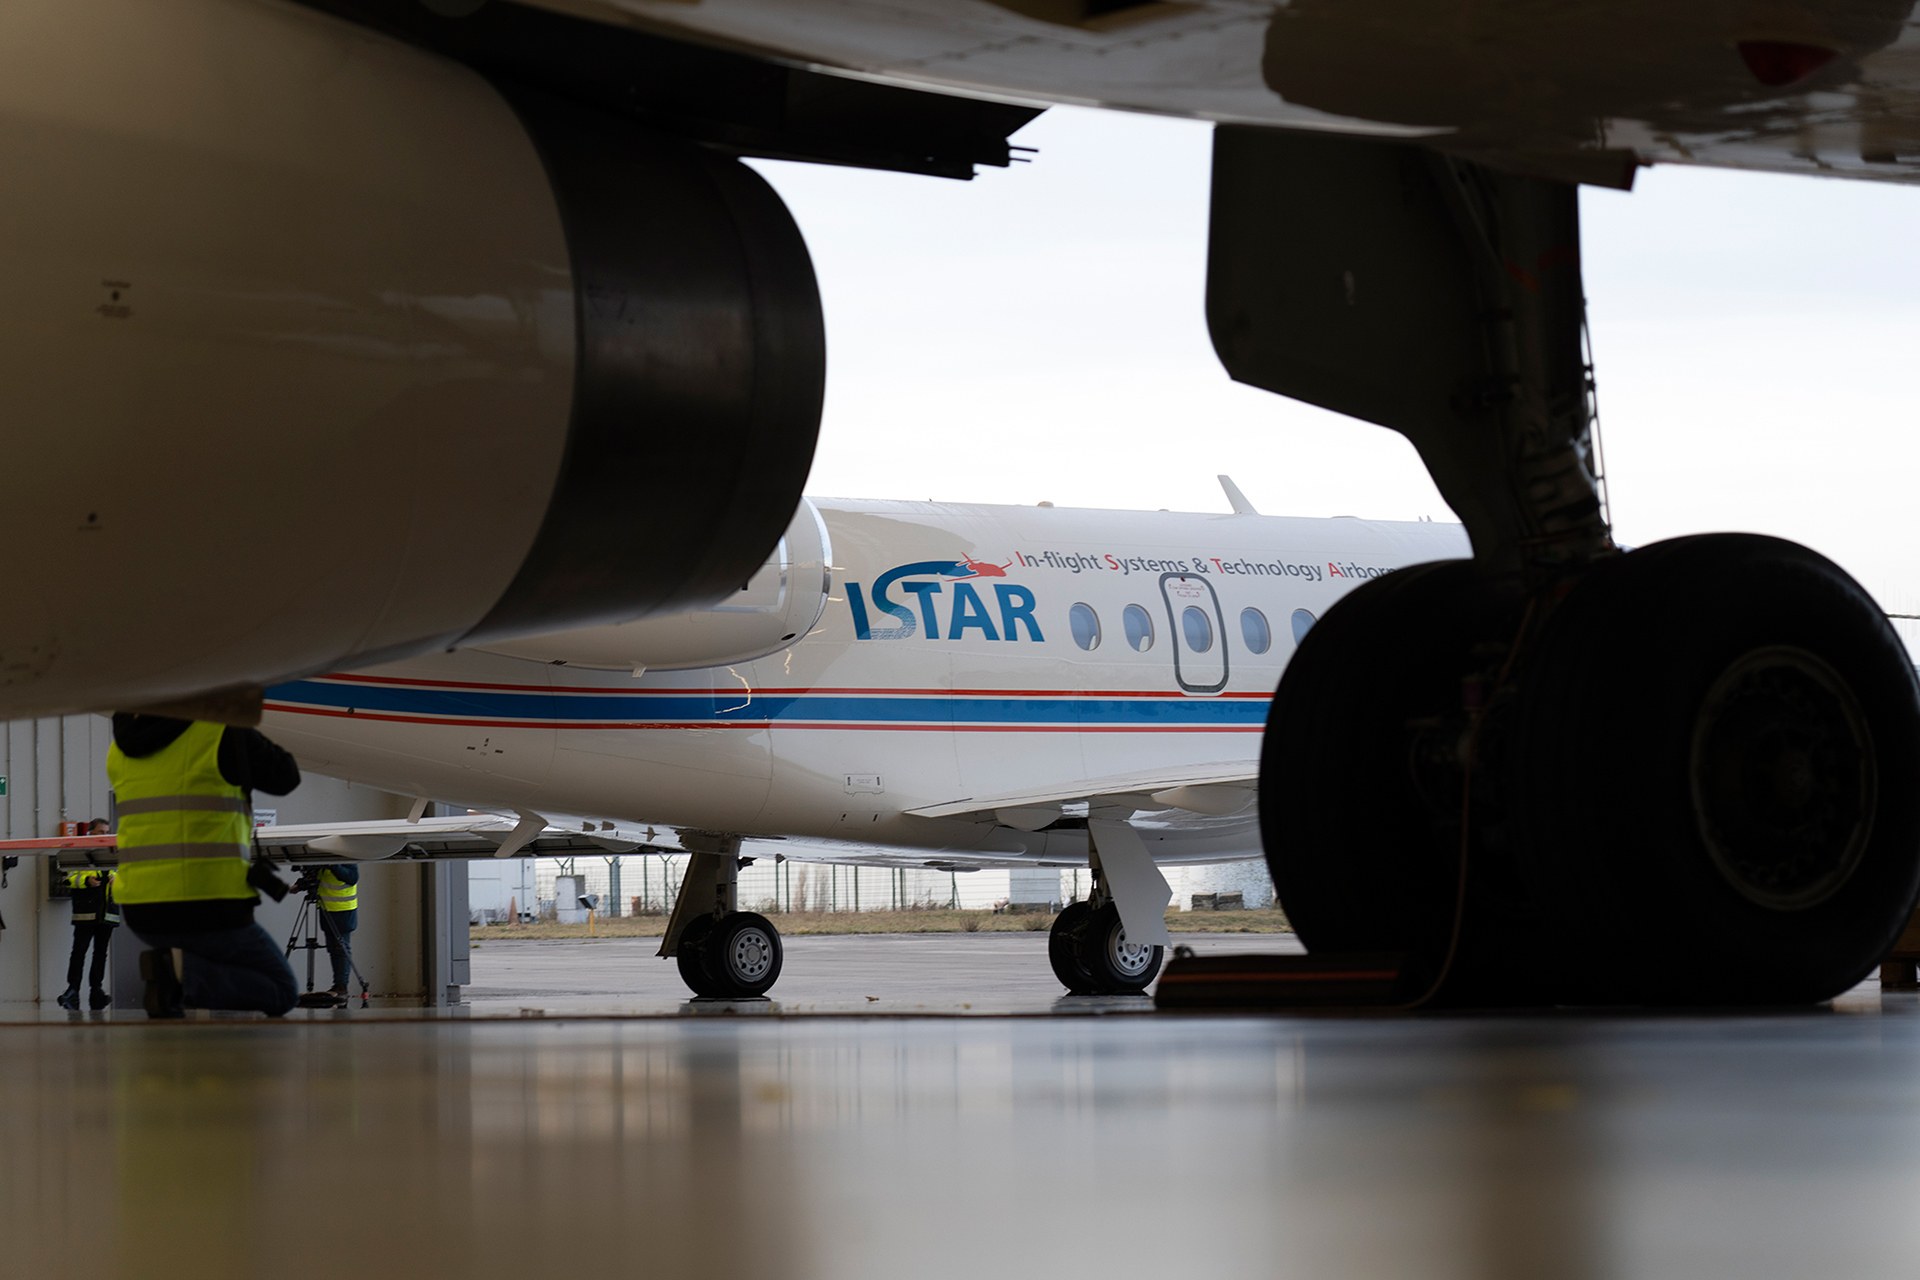 A new home for ISTAR in the hangar at DLR Braunschweig